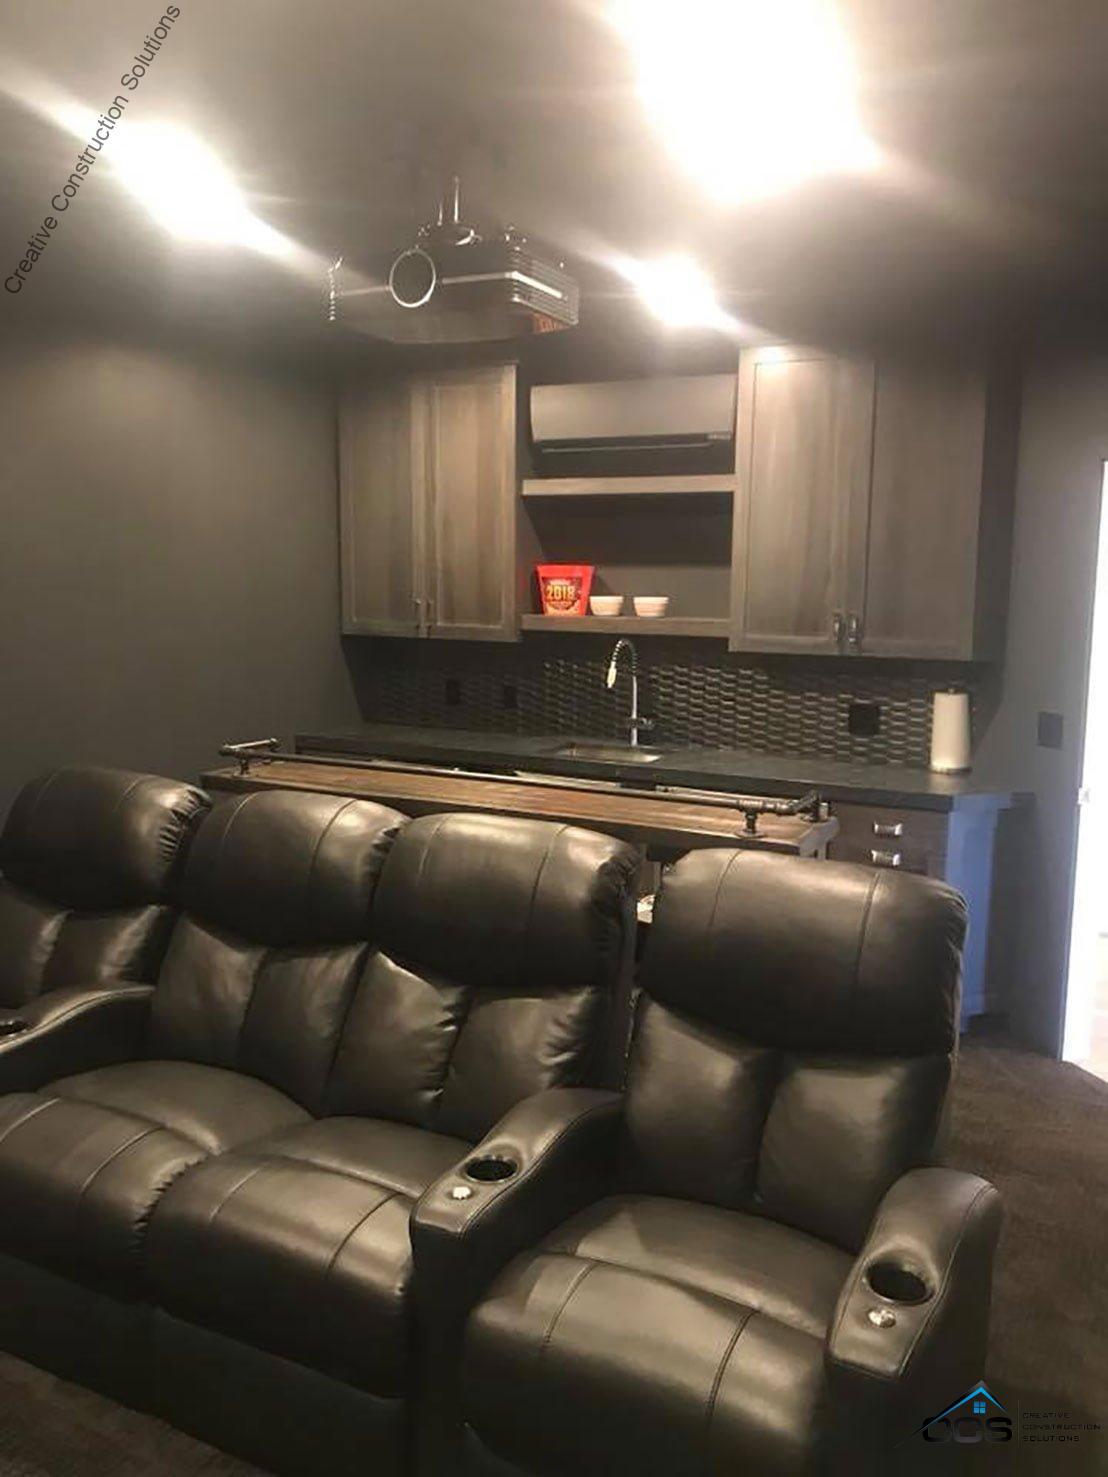 An image of a Utah finished basement theater room. A logo for CCS Creative Construction Solutions of Utah is in the bottom right-hand corner.